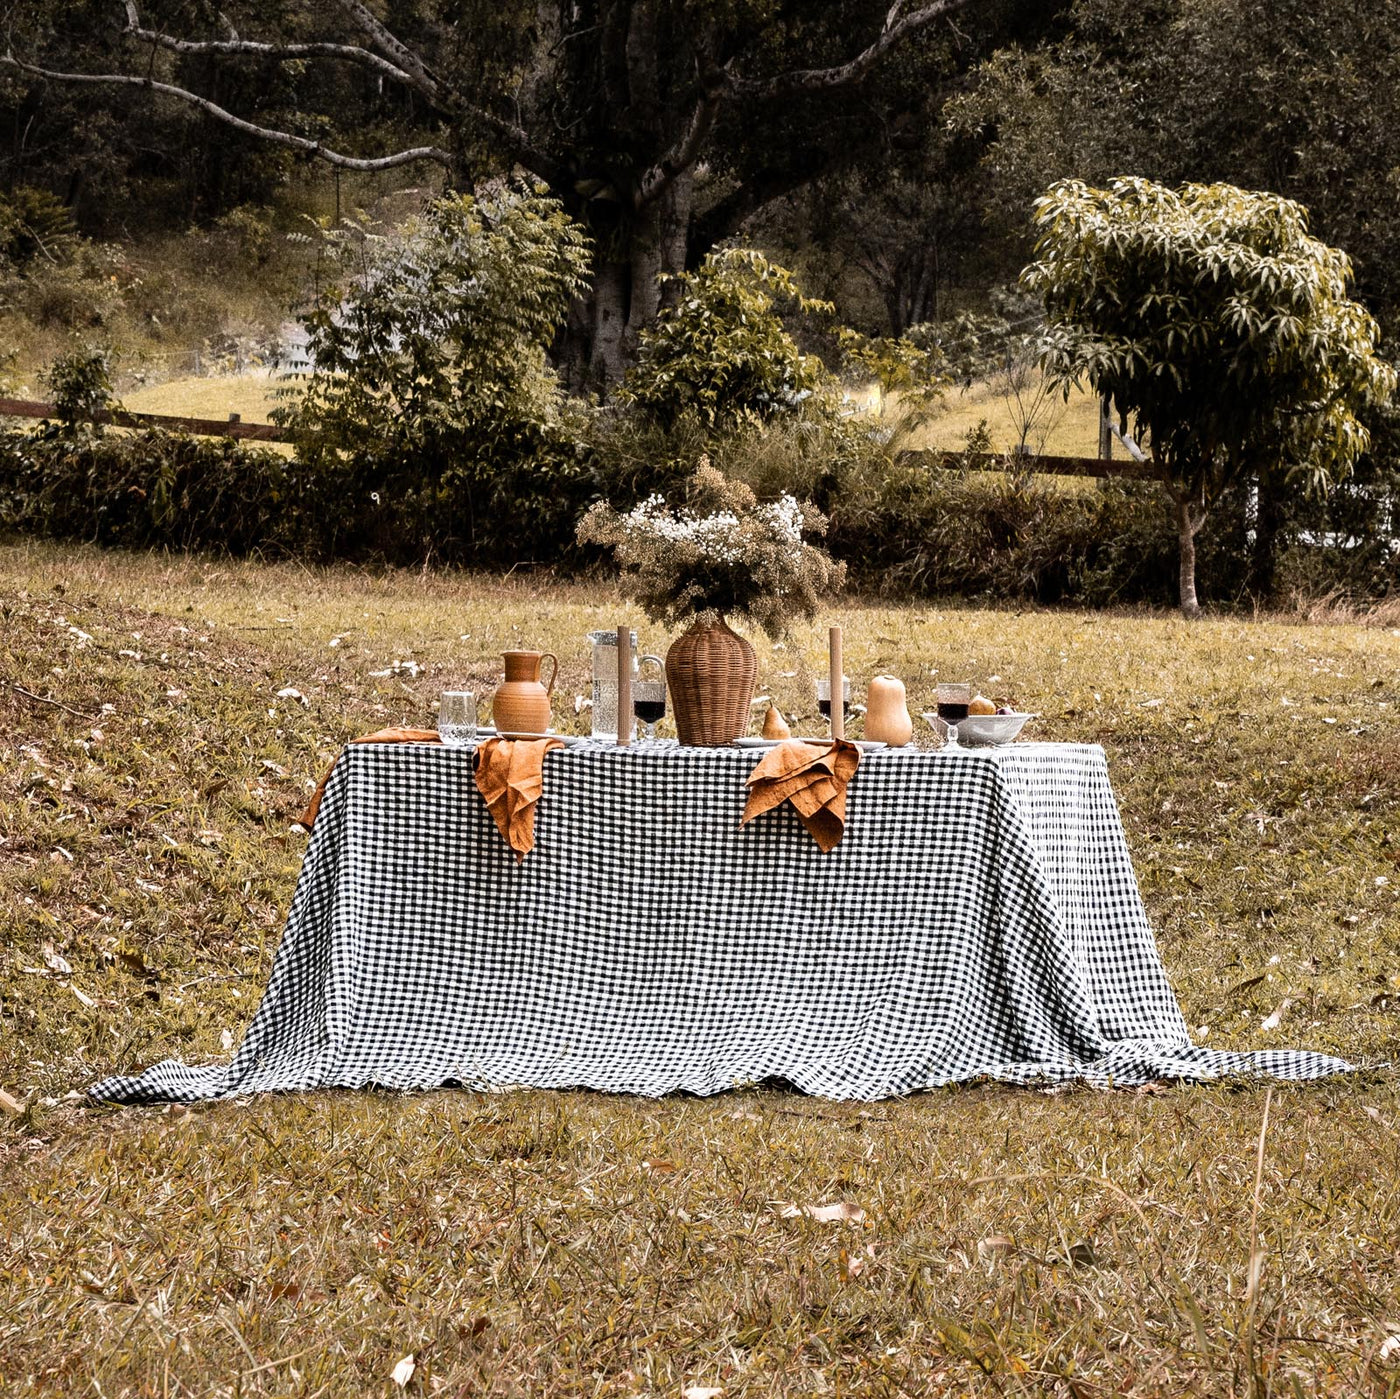 French Flax Linen Table Cloth in Charcoal Gingham